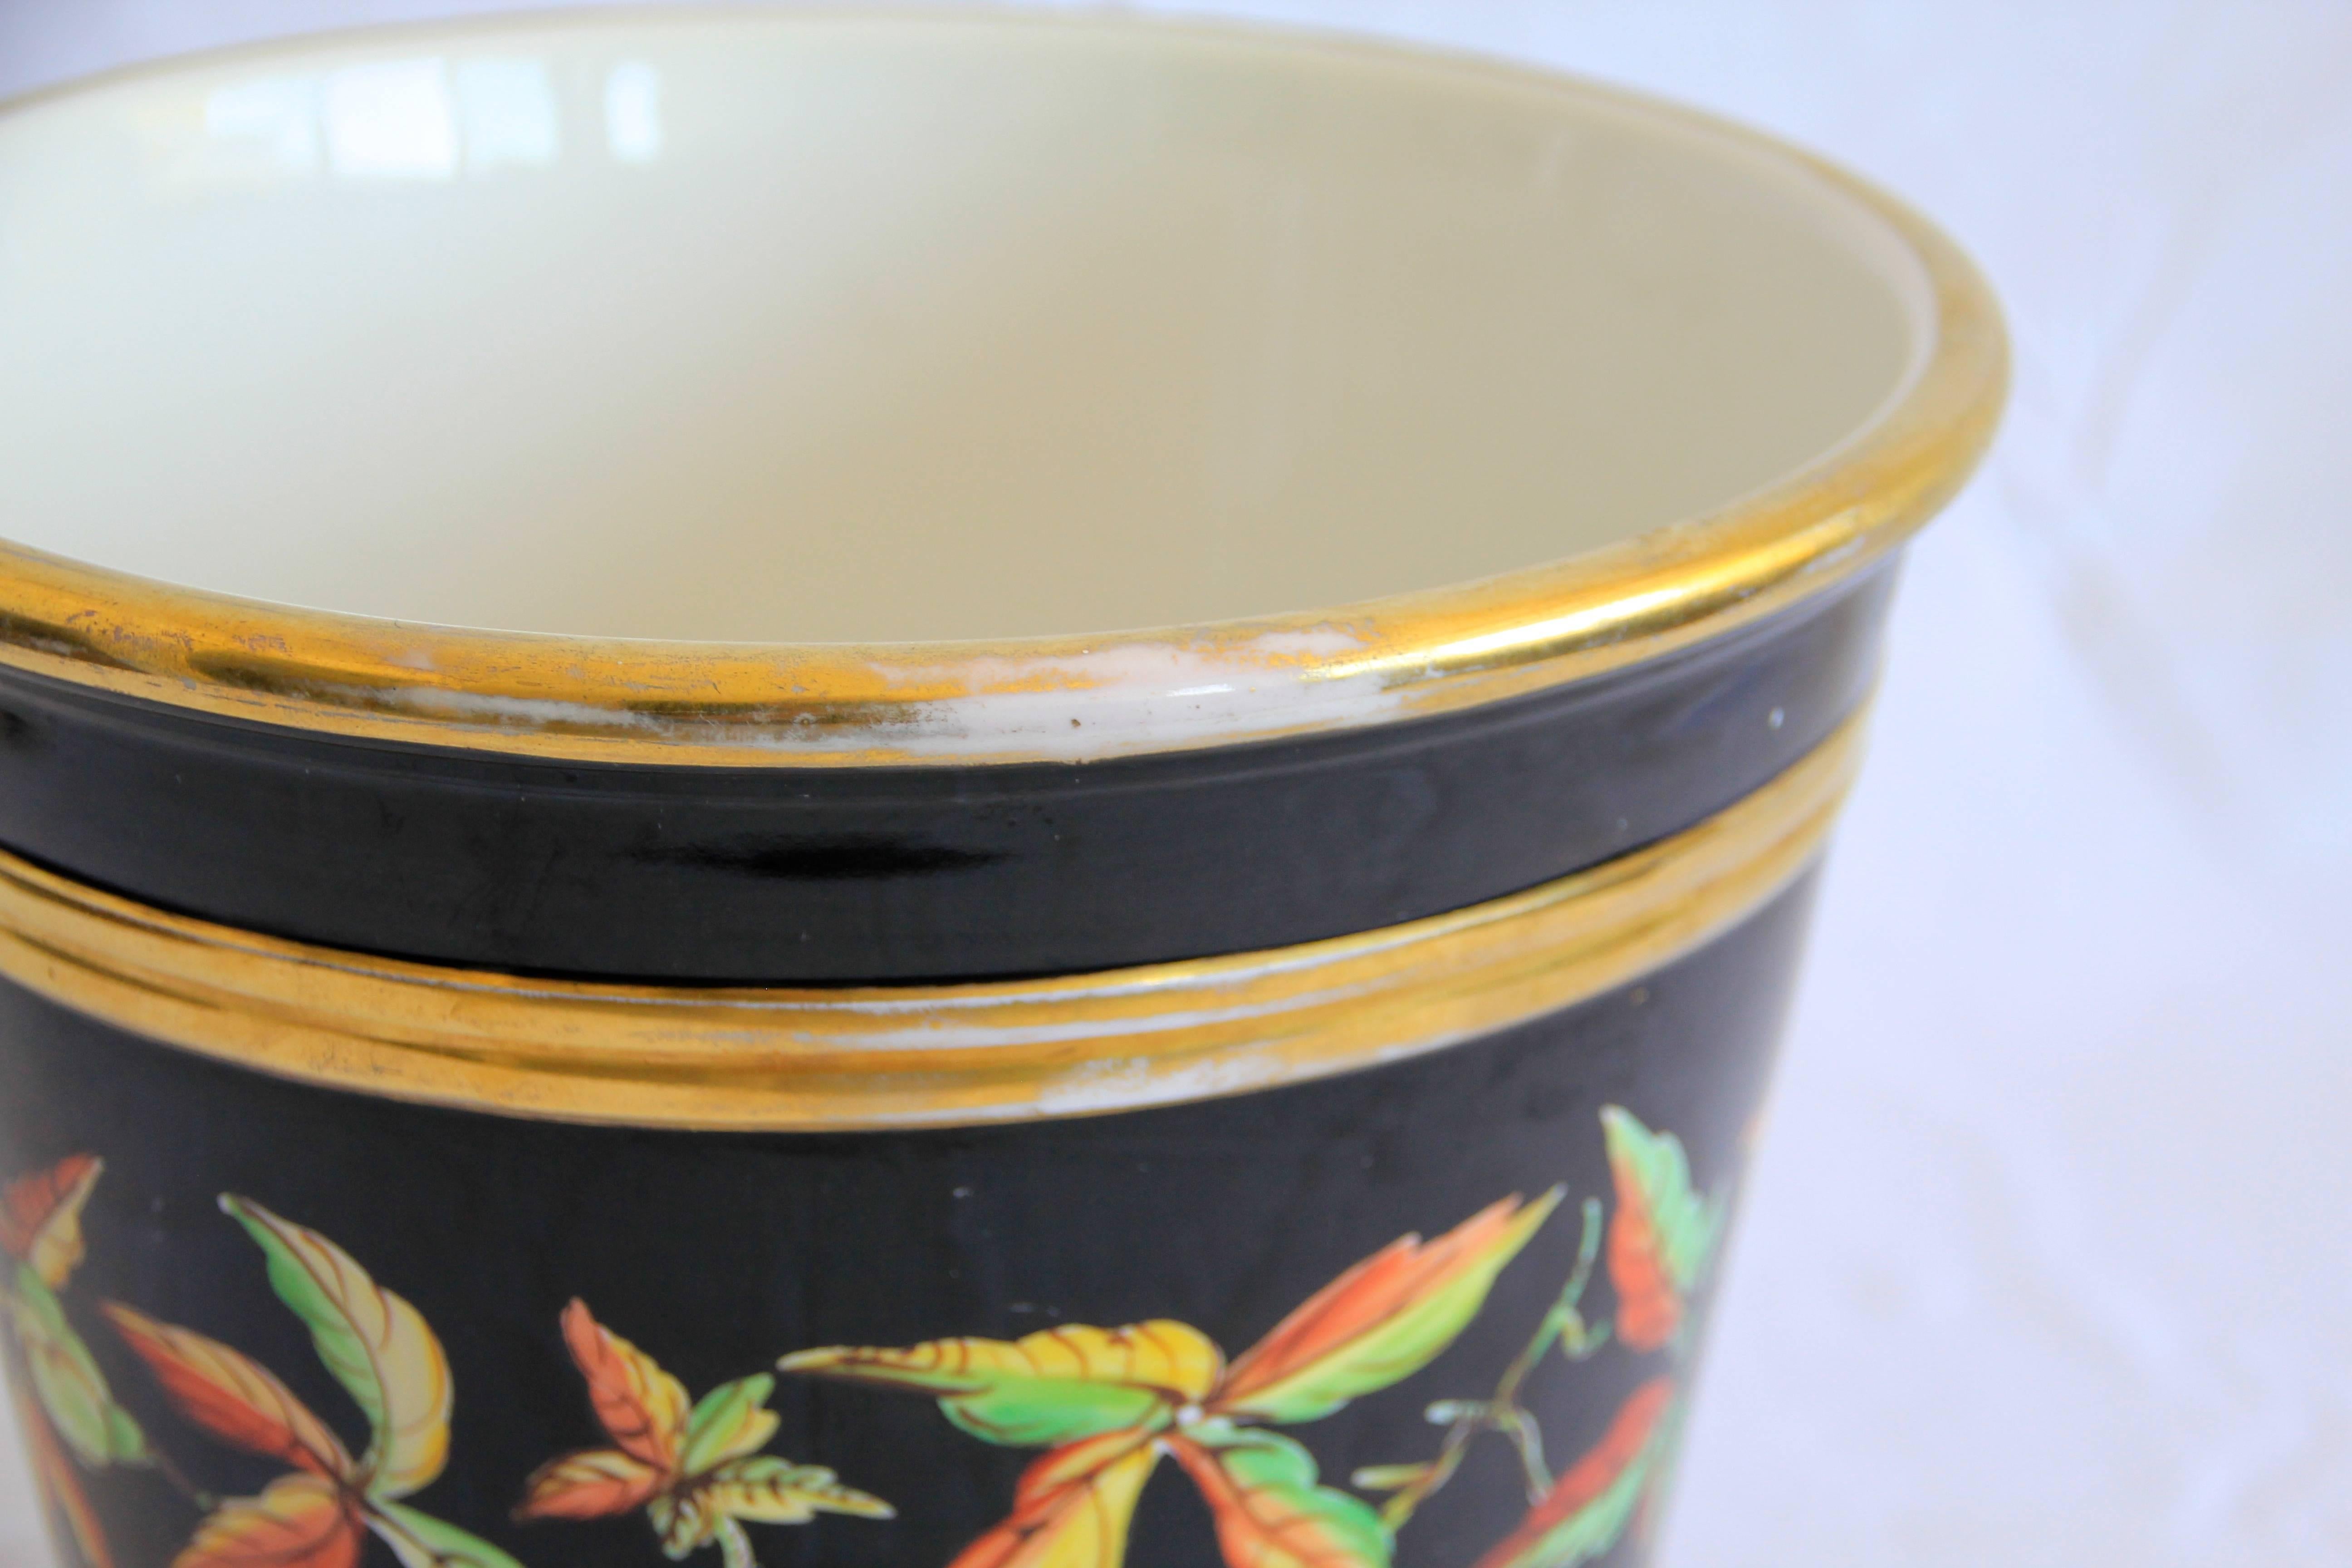 Beautiful Porcelain Cachepot from the Royal Porcelain Manufacture (translated in German: 